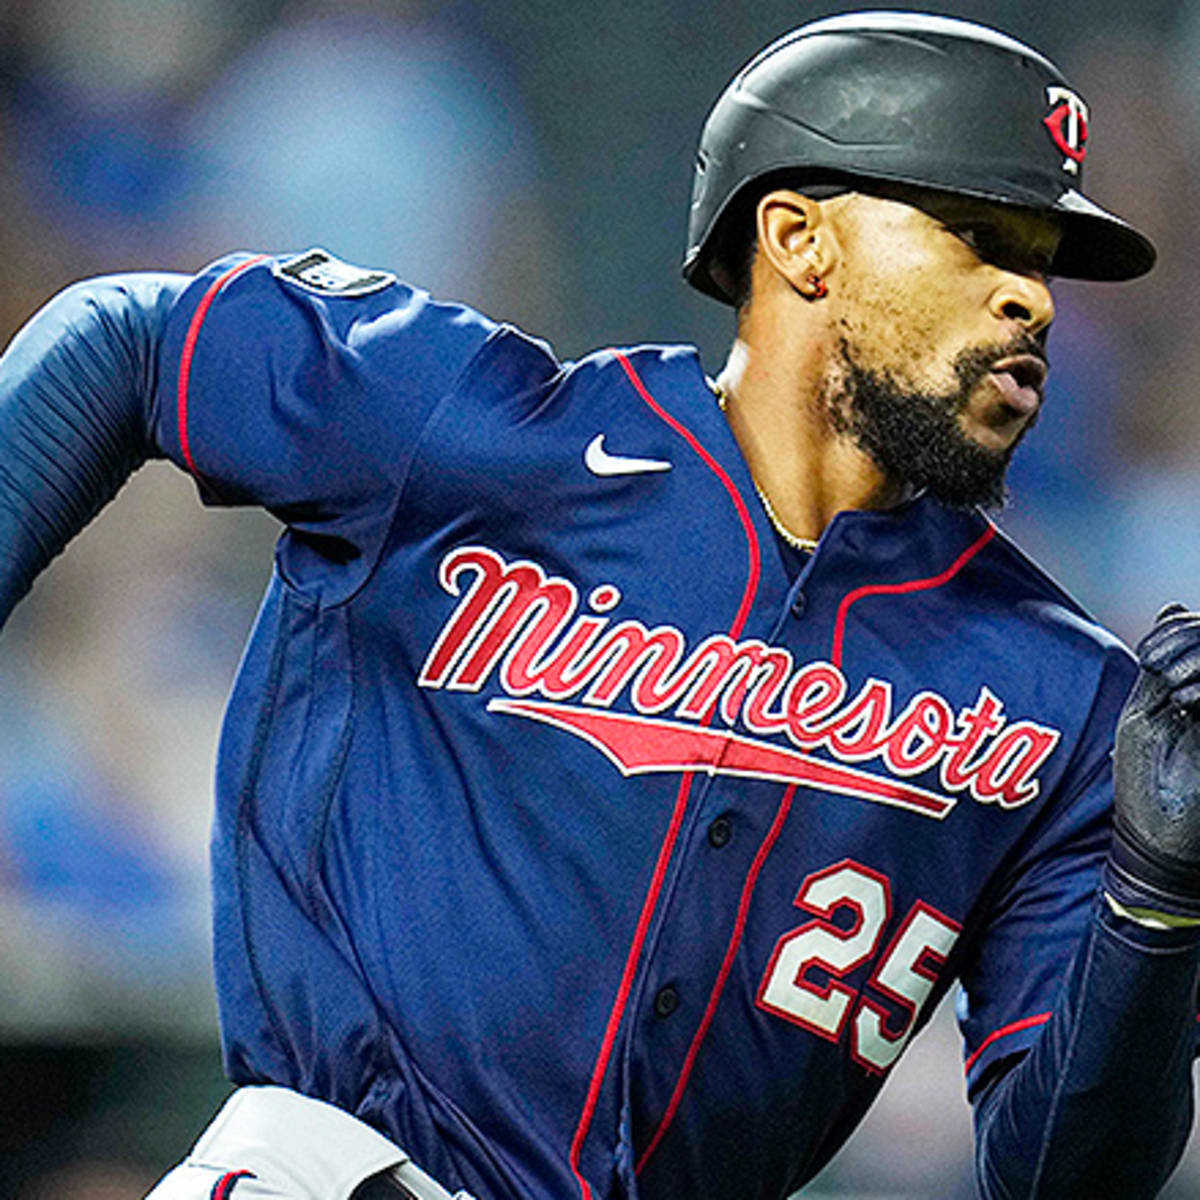 Minnesota Twins 2022 Scouting, Projected Lineup, Season Prediction